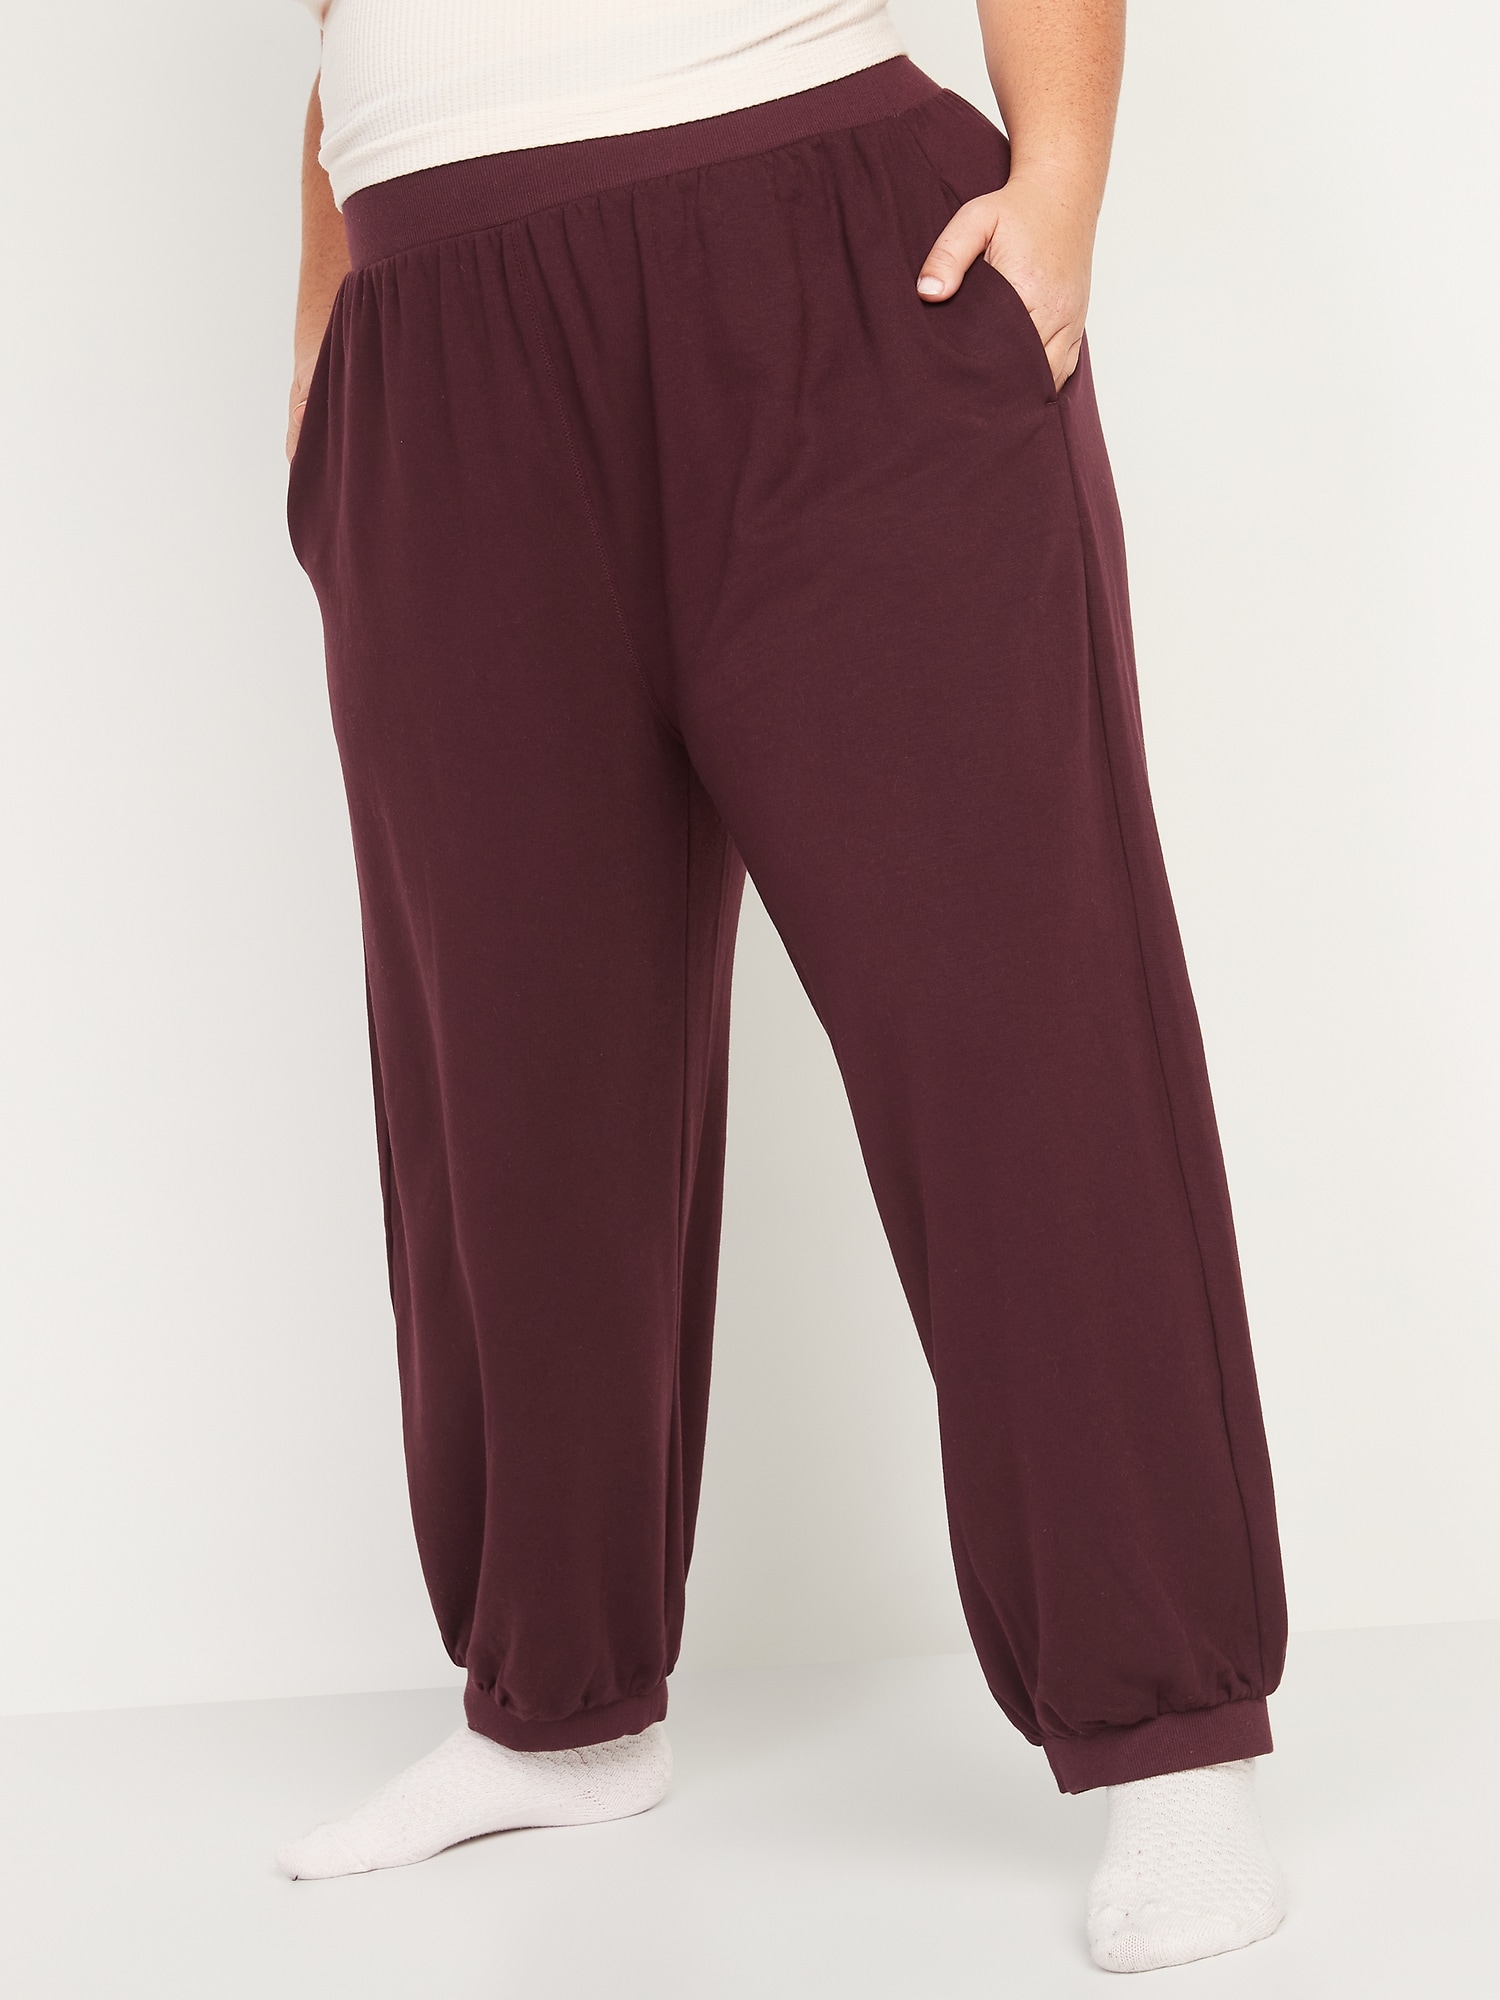 High-Waisted Cozy-Knit Ankle Jogger Sweatpants for Women | Old Navy